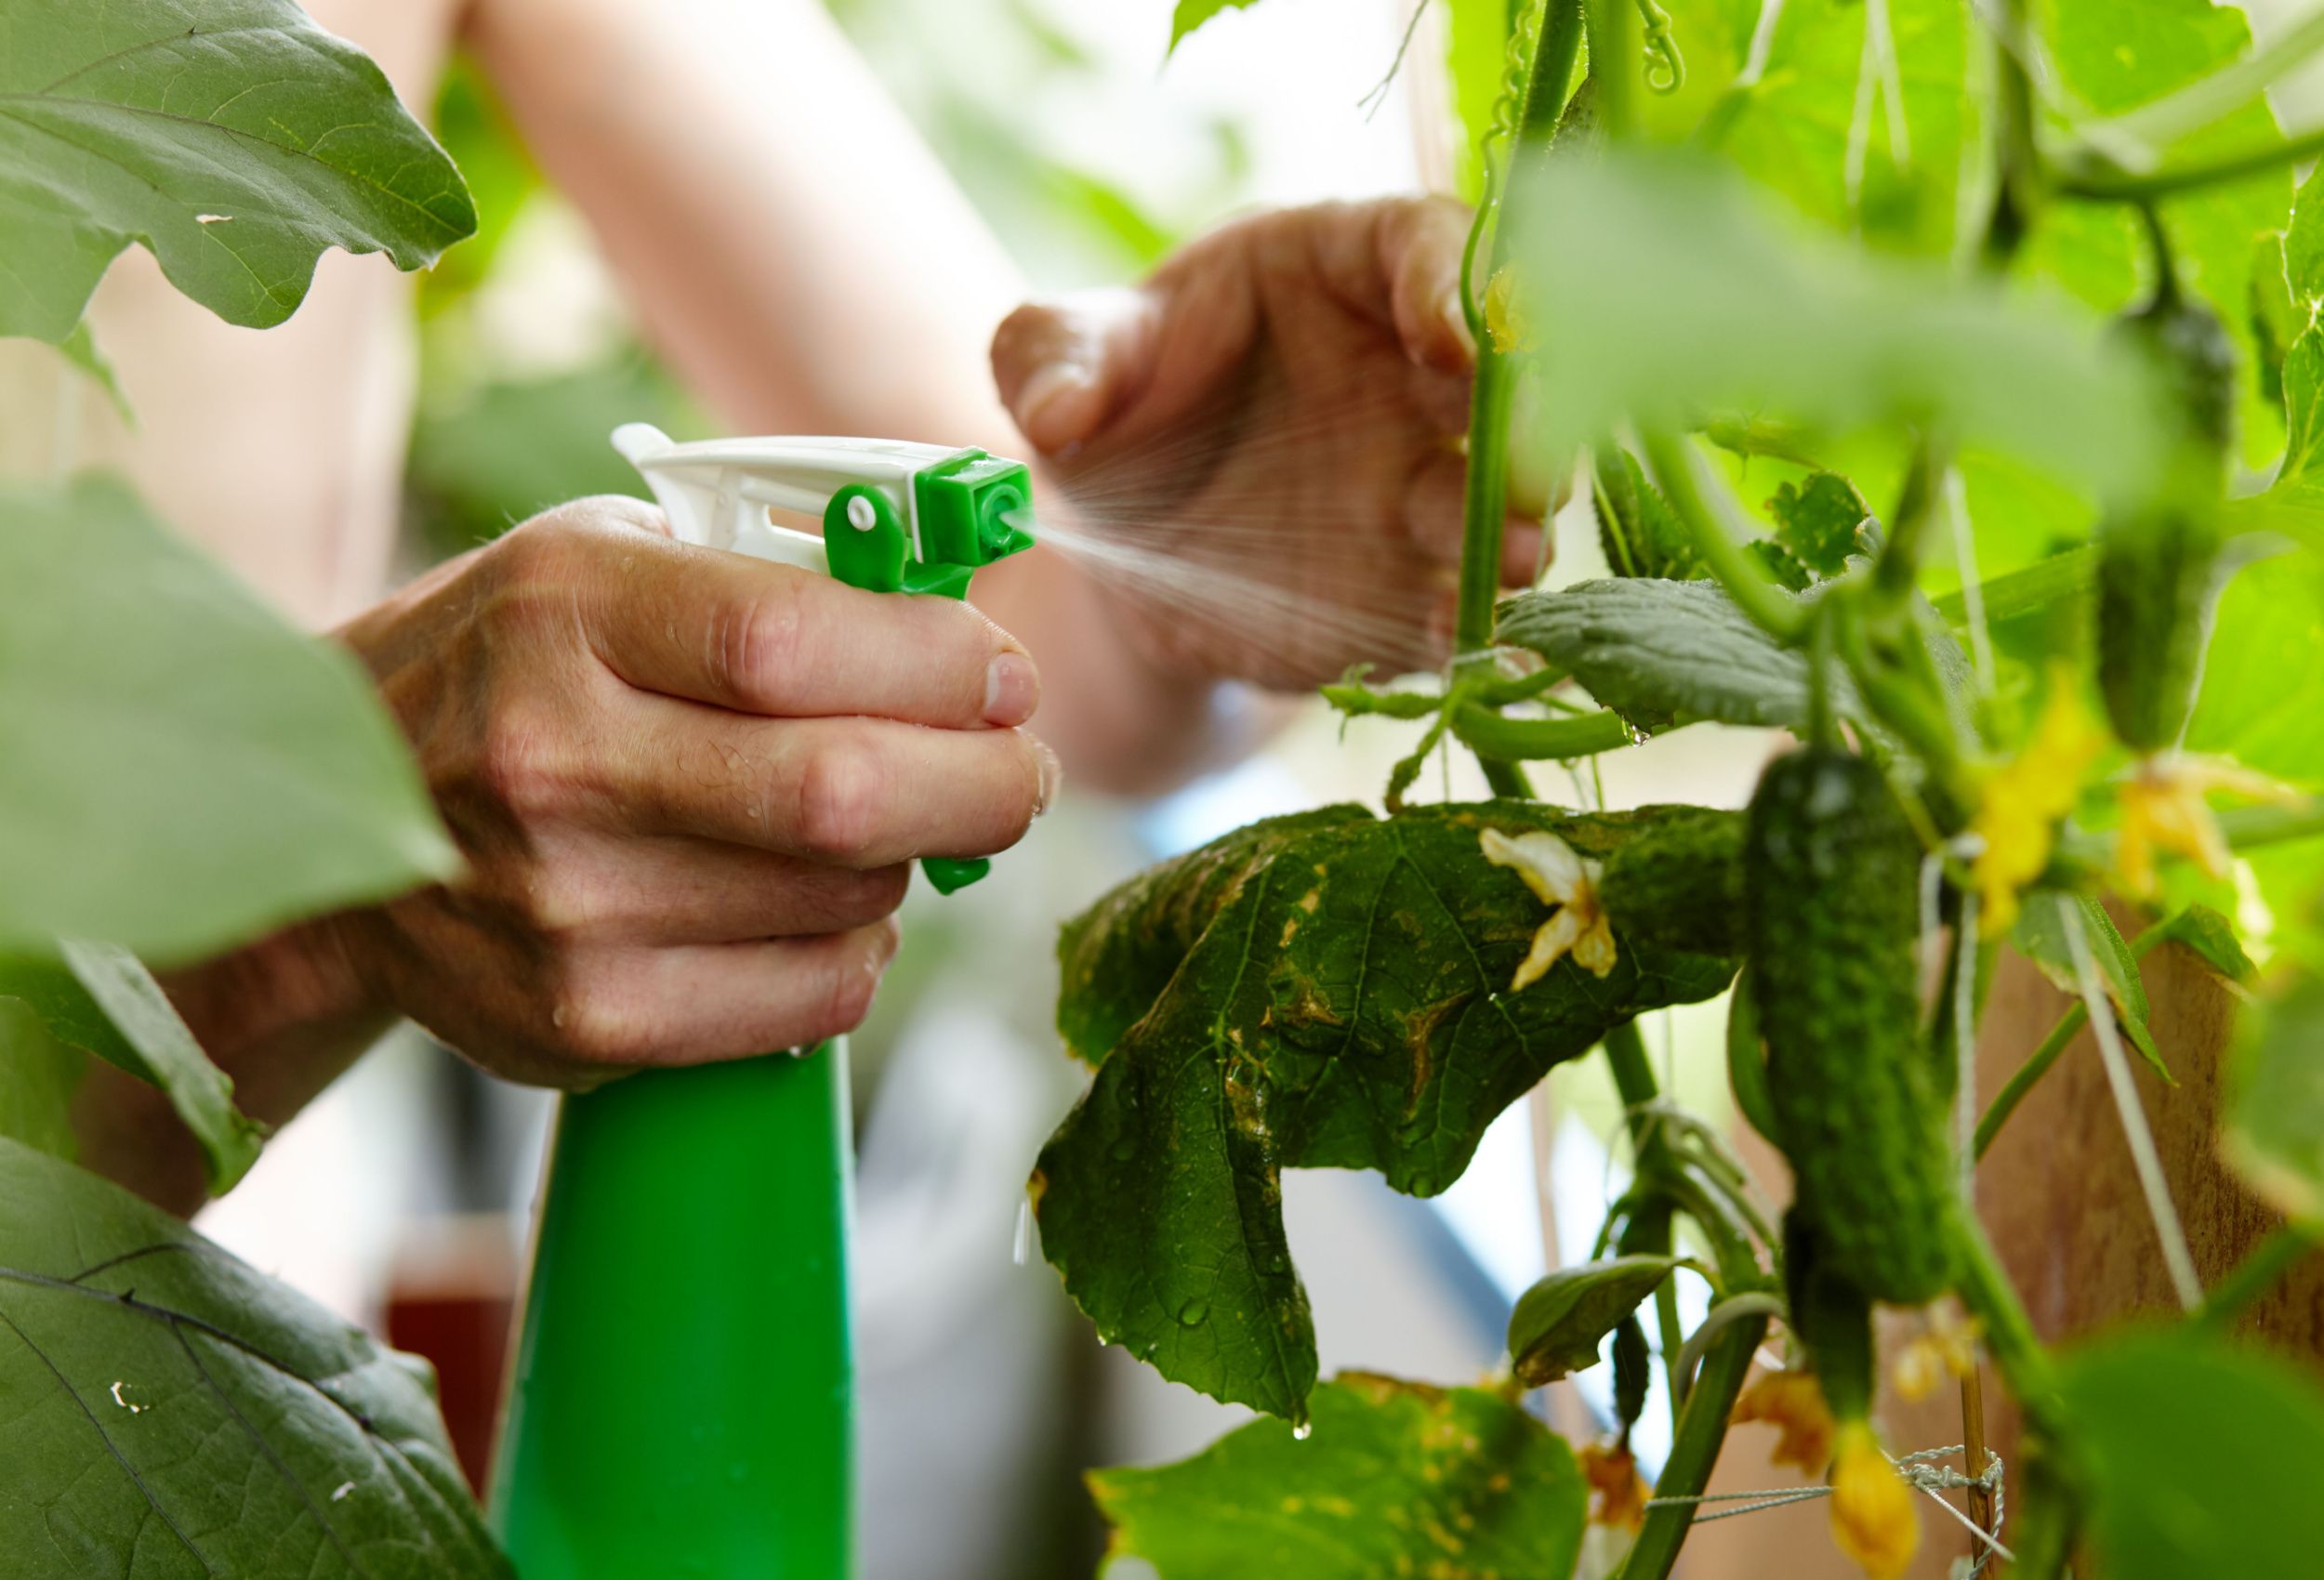 Men's hands hold spray bottle and watering the cucumber plant